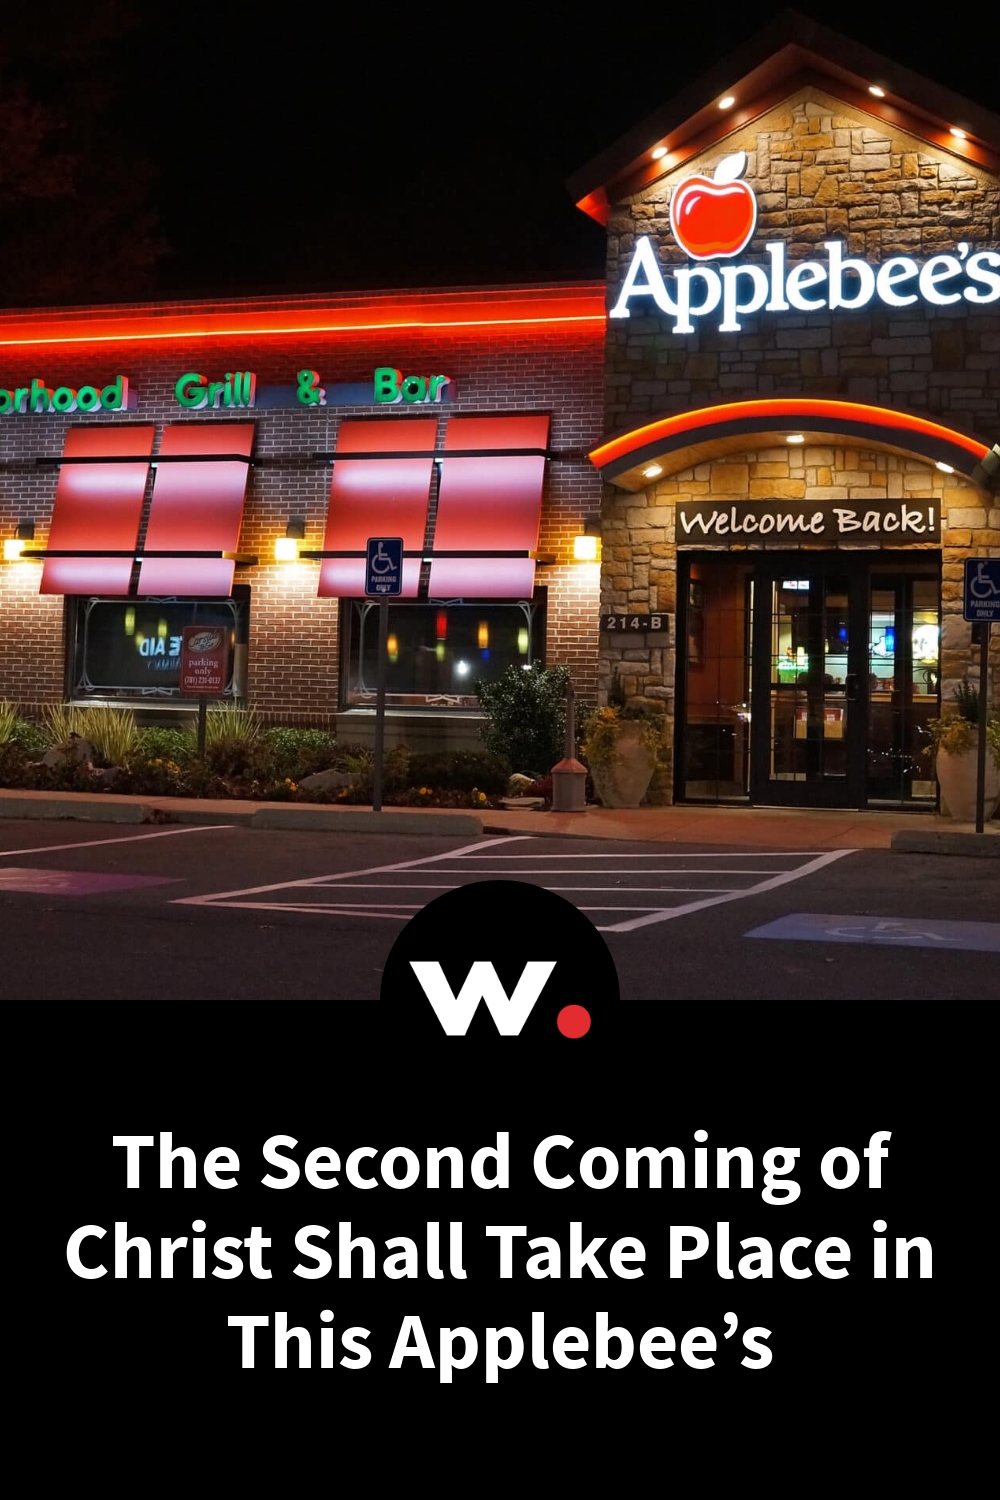 The Second Coming of Christ Shall Take Place in This Applebee’s